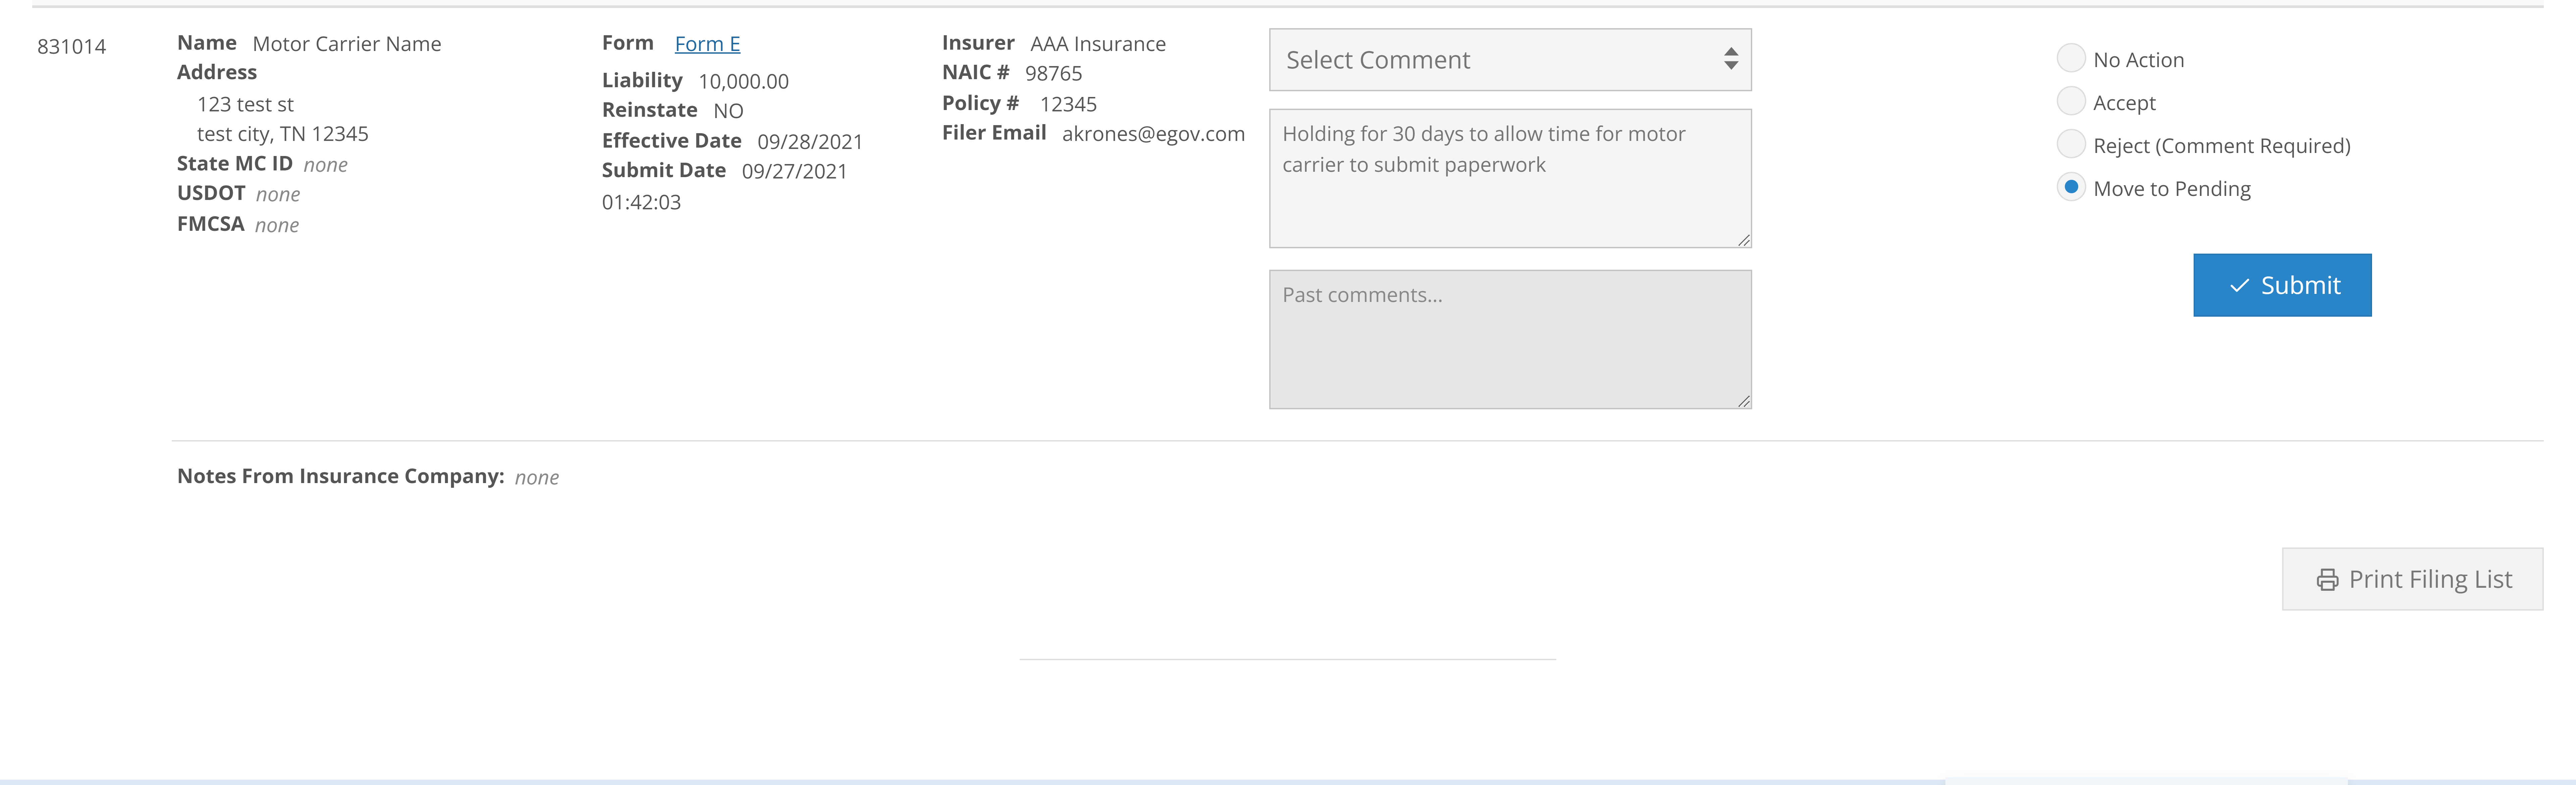 Screen shot showing comment section filled out in the New Filings For State User Single Submit page.